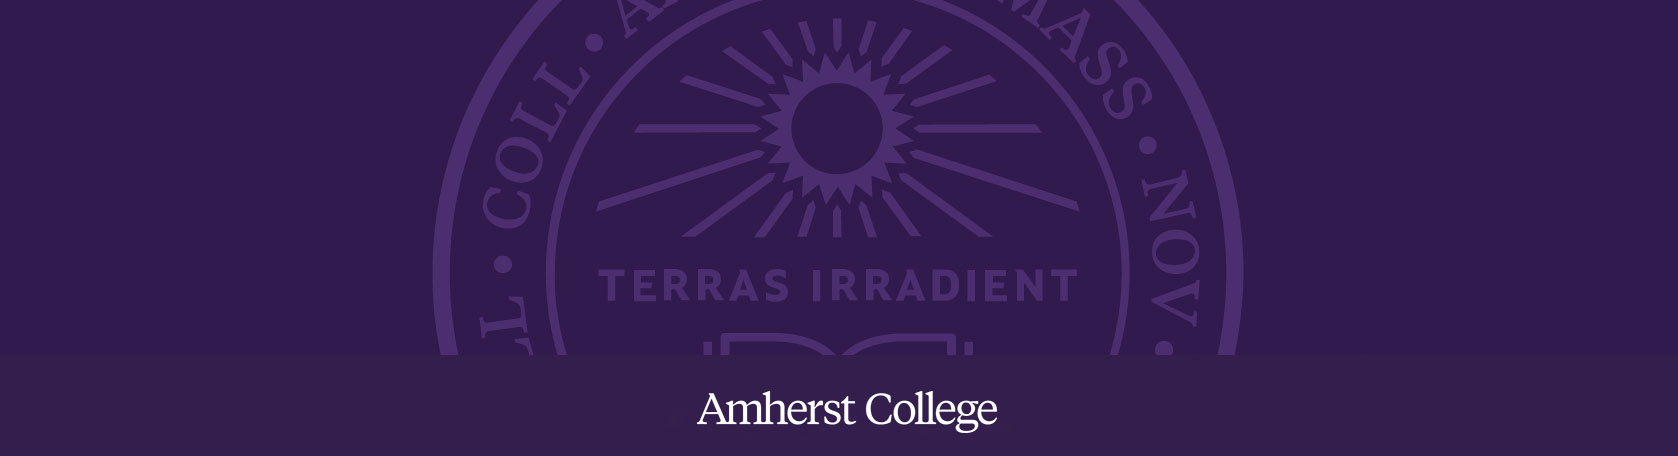 Graphic of Amherst College Seal linking to a press release about honorary degree recipients.